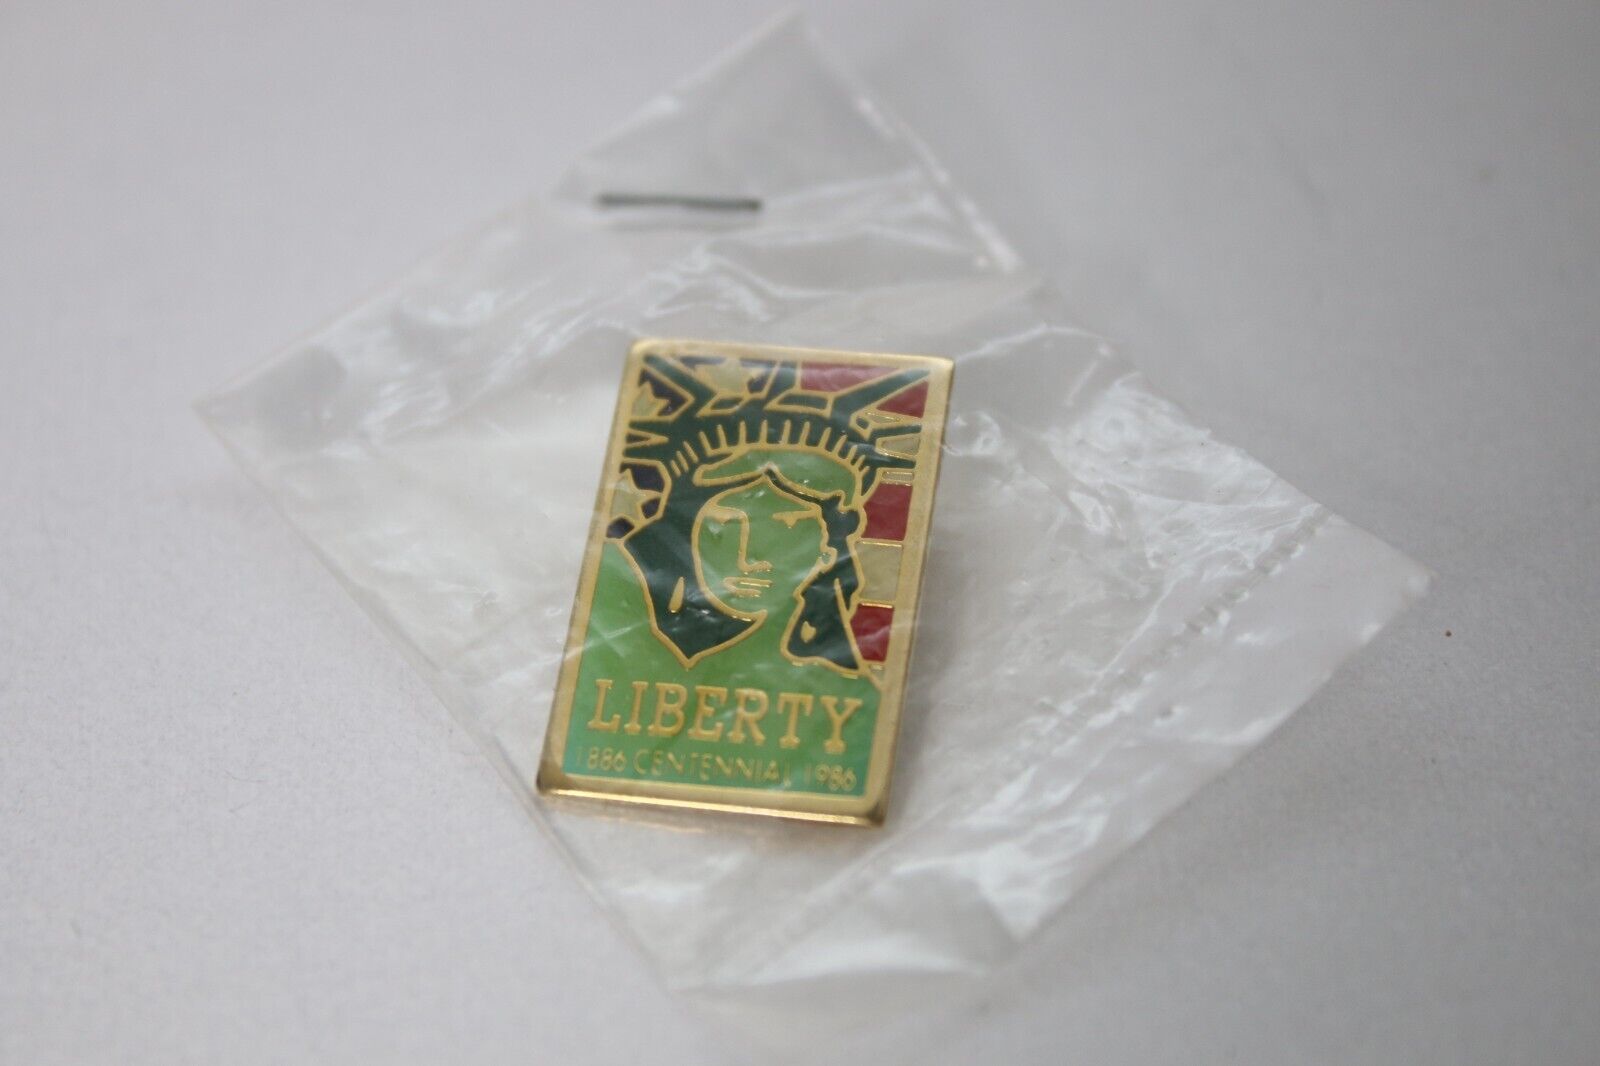 Vintage Statue of Liberty Centennial 1886-1986 Lapel/Tie/Hat Pin New in Package